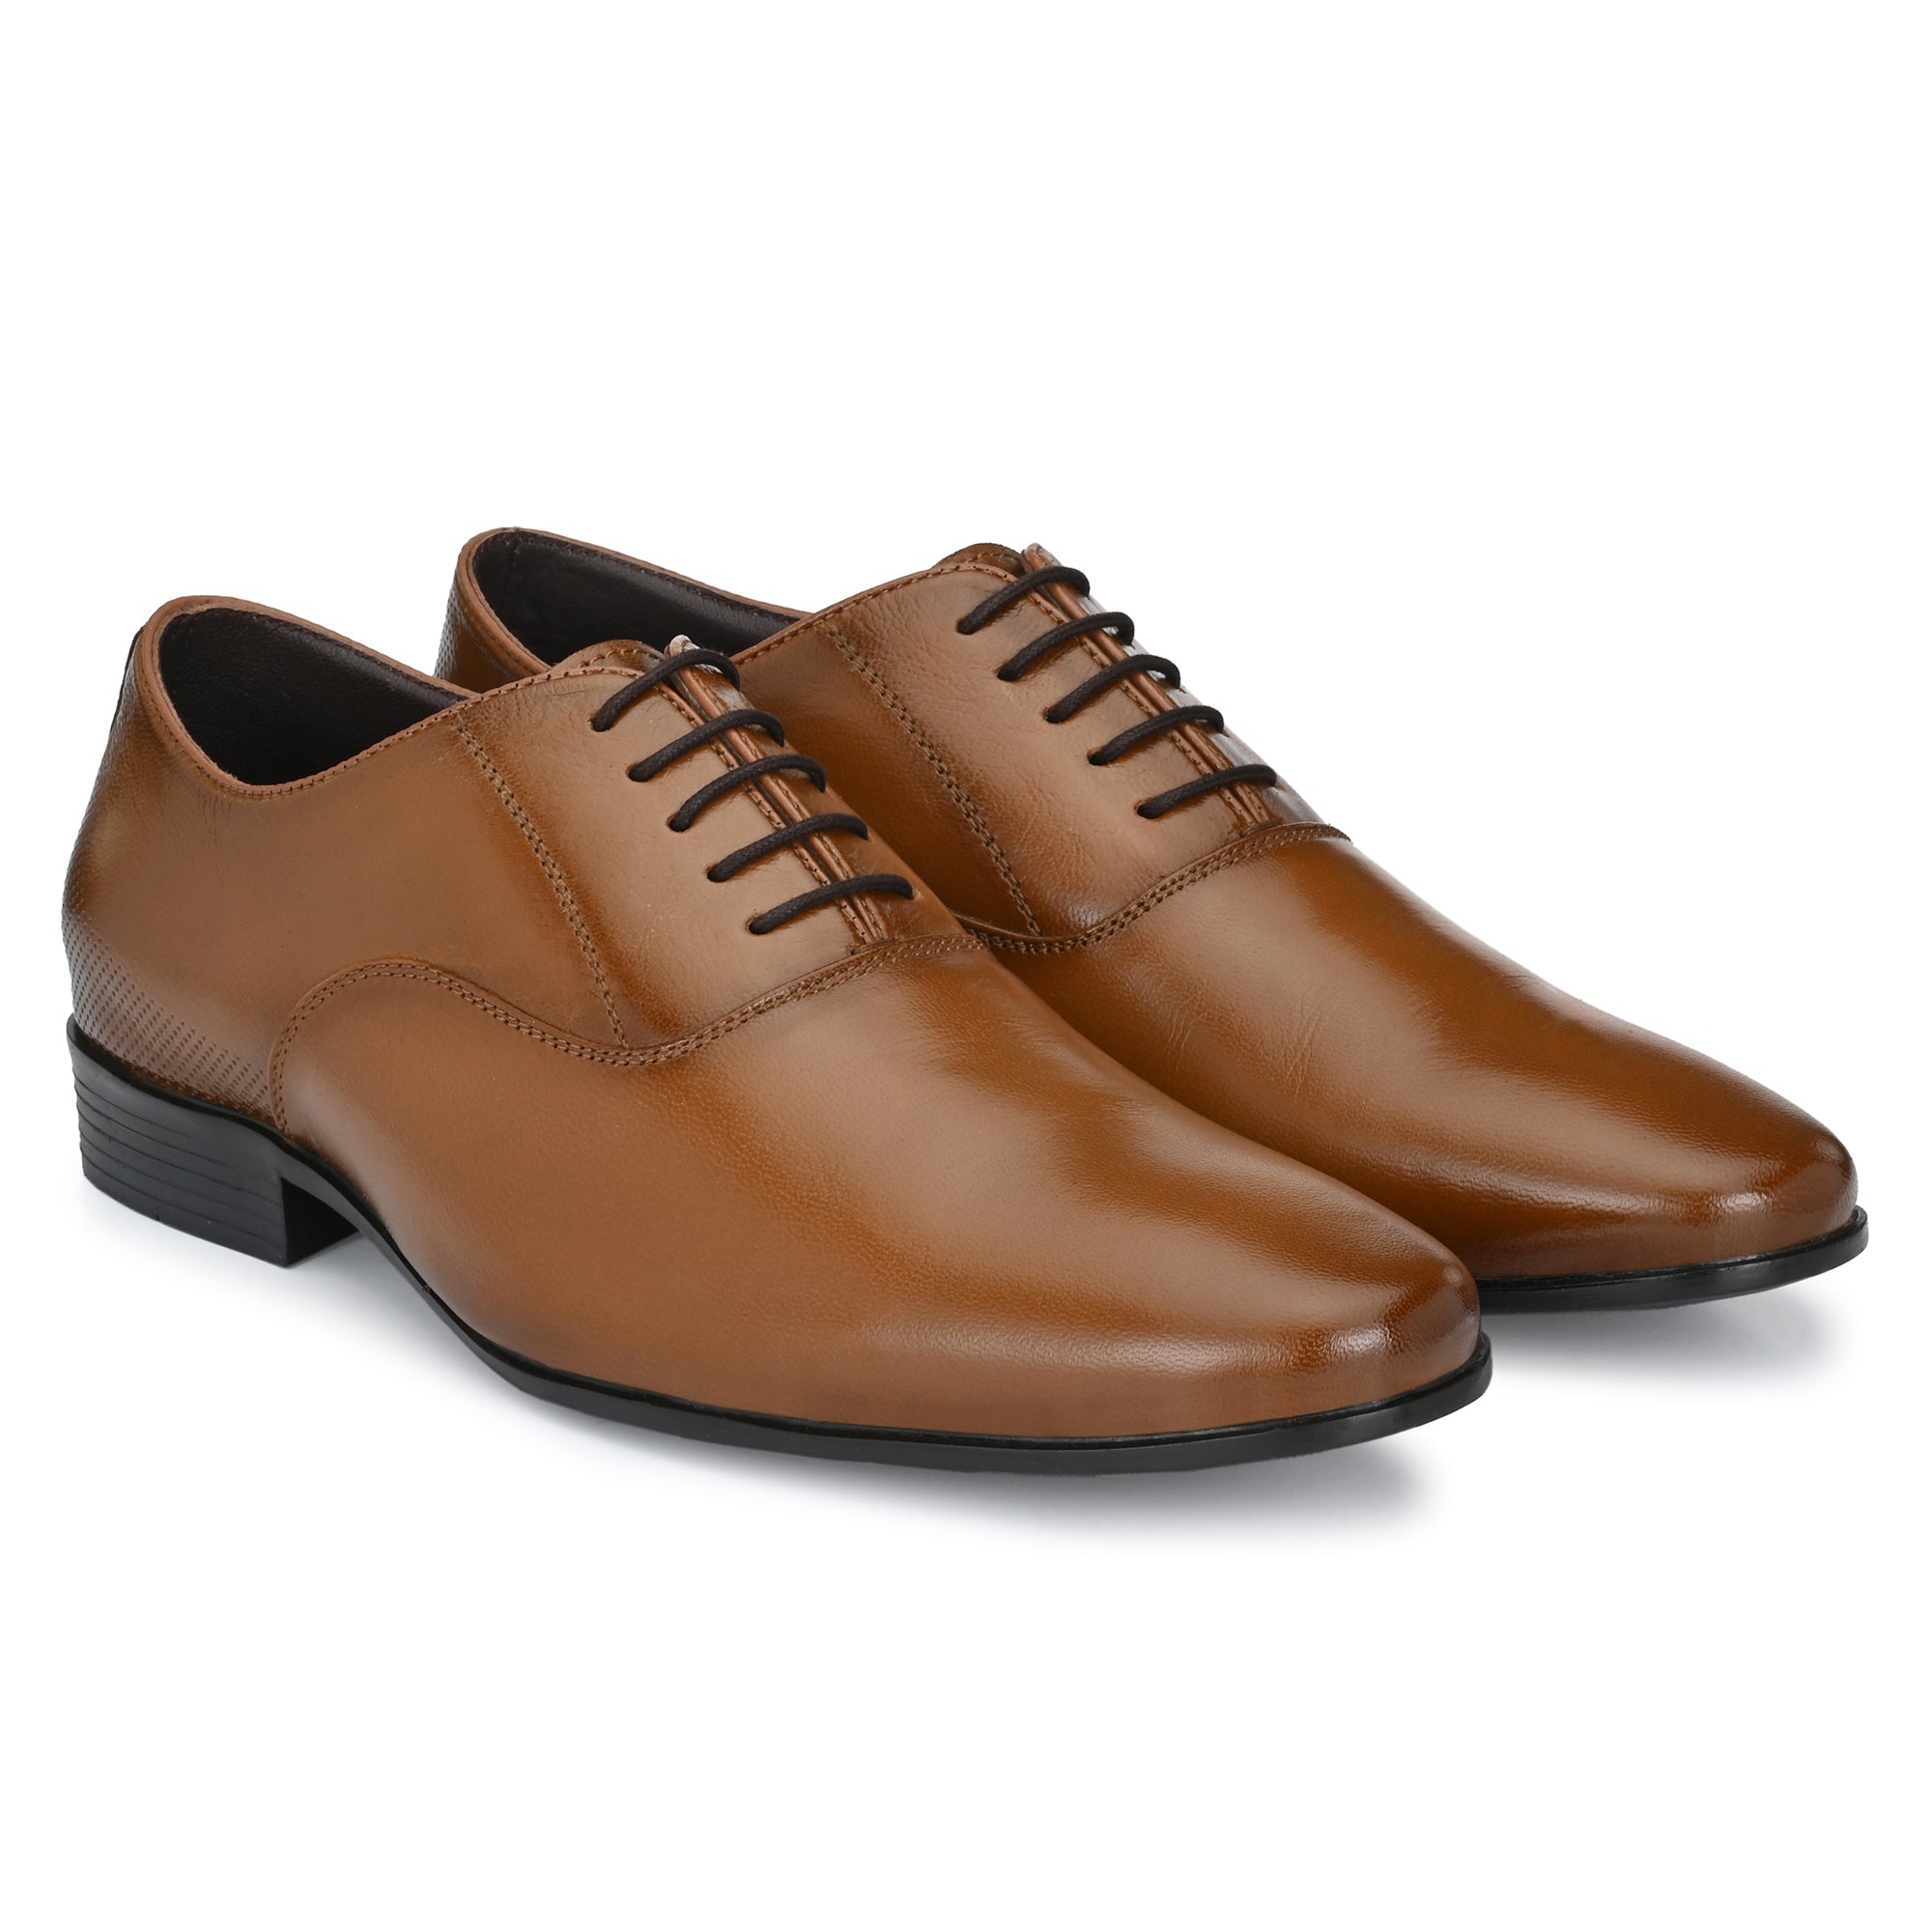 Lace Up Formal Shoes For Men